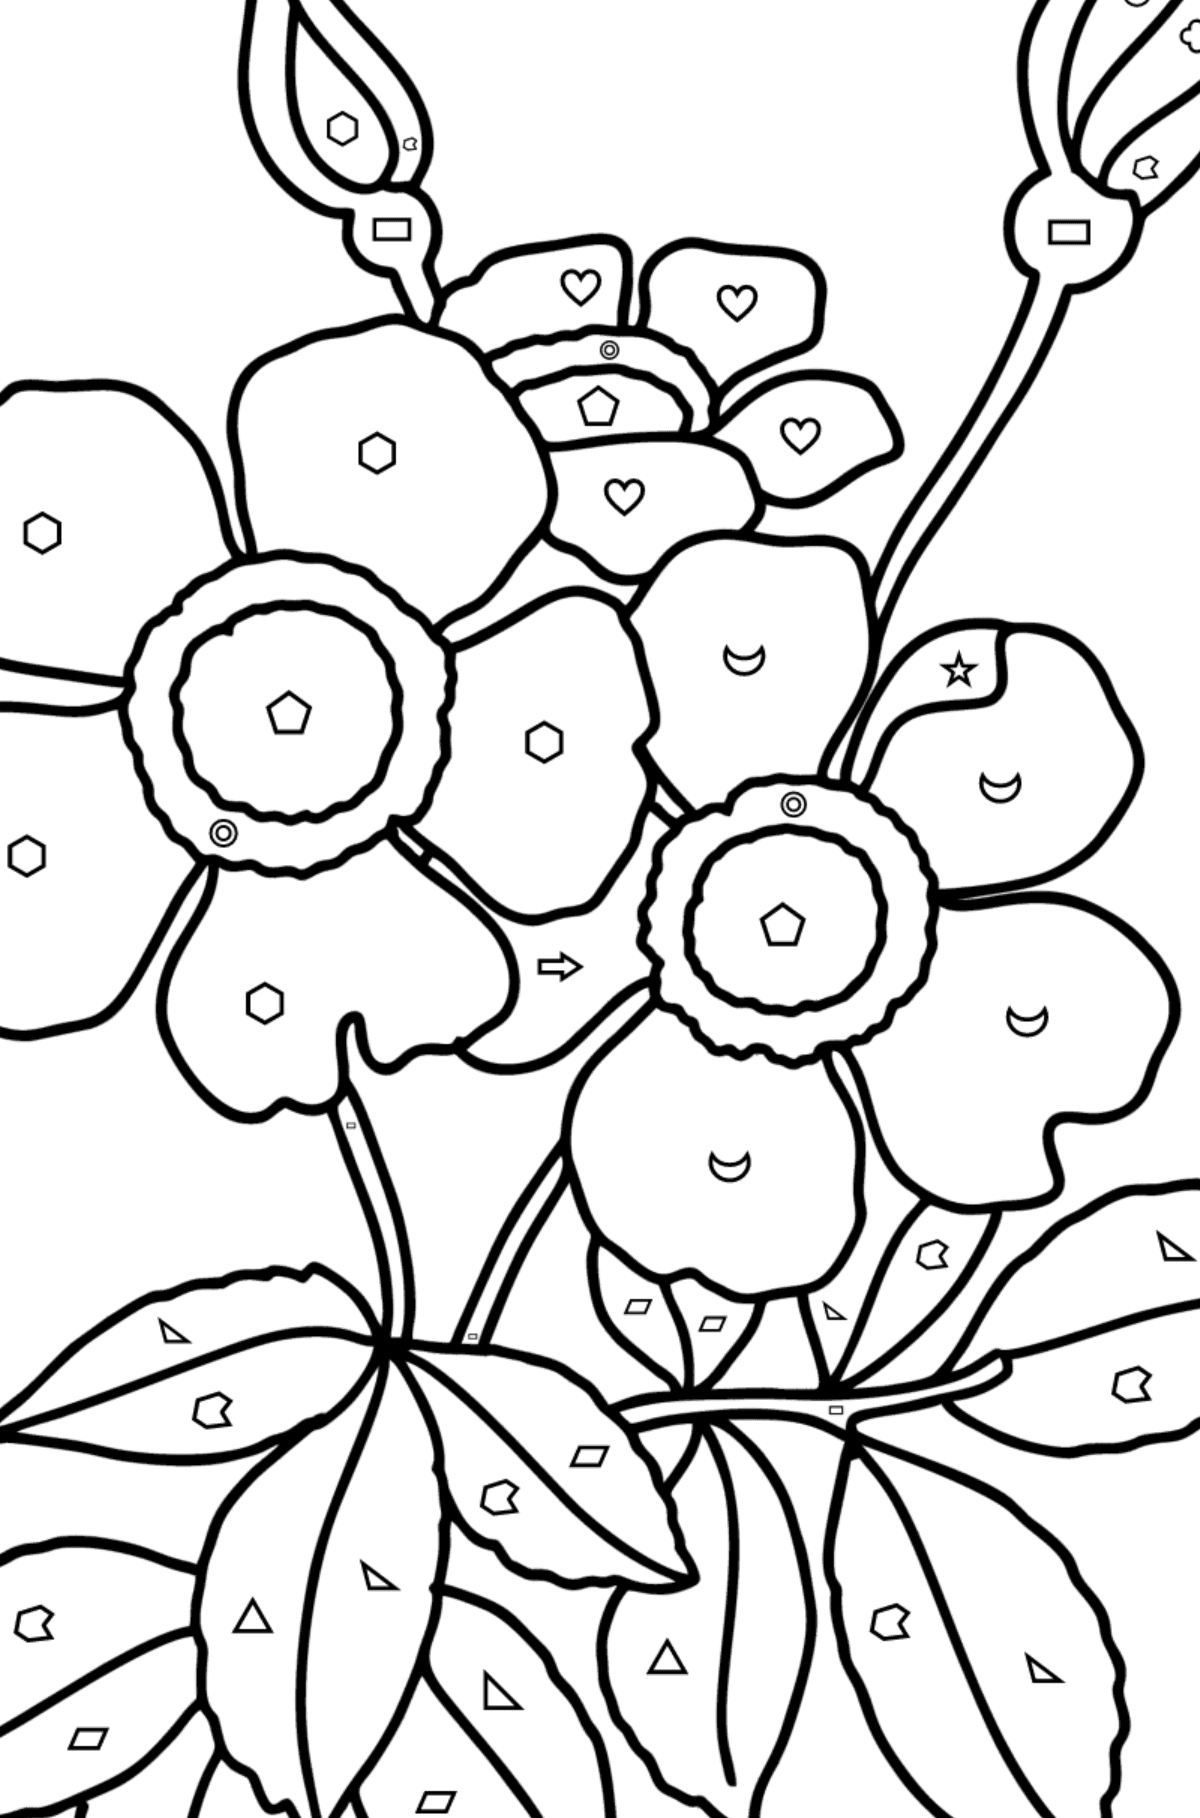 Spray rose coloring page - Coloring by Geometric Shapes for Kids